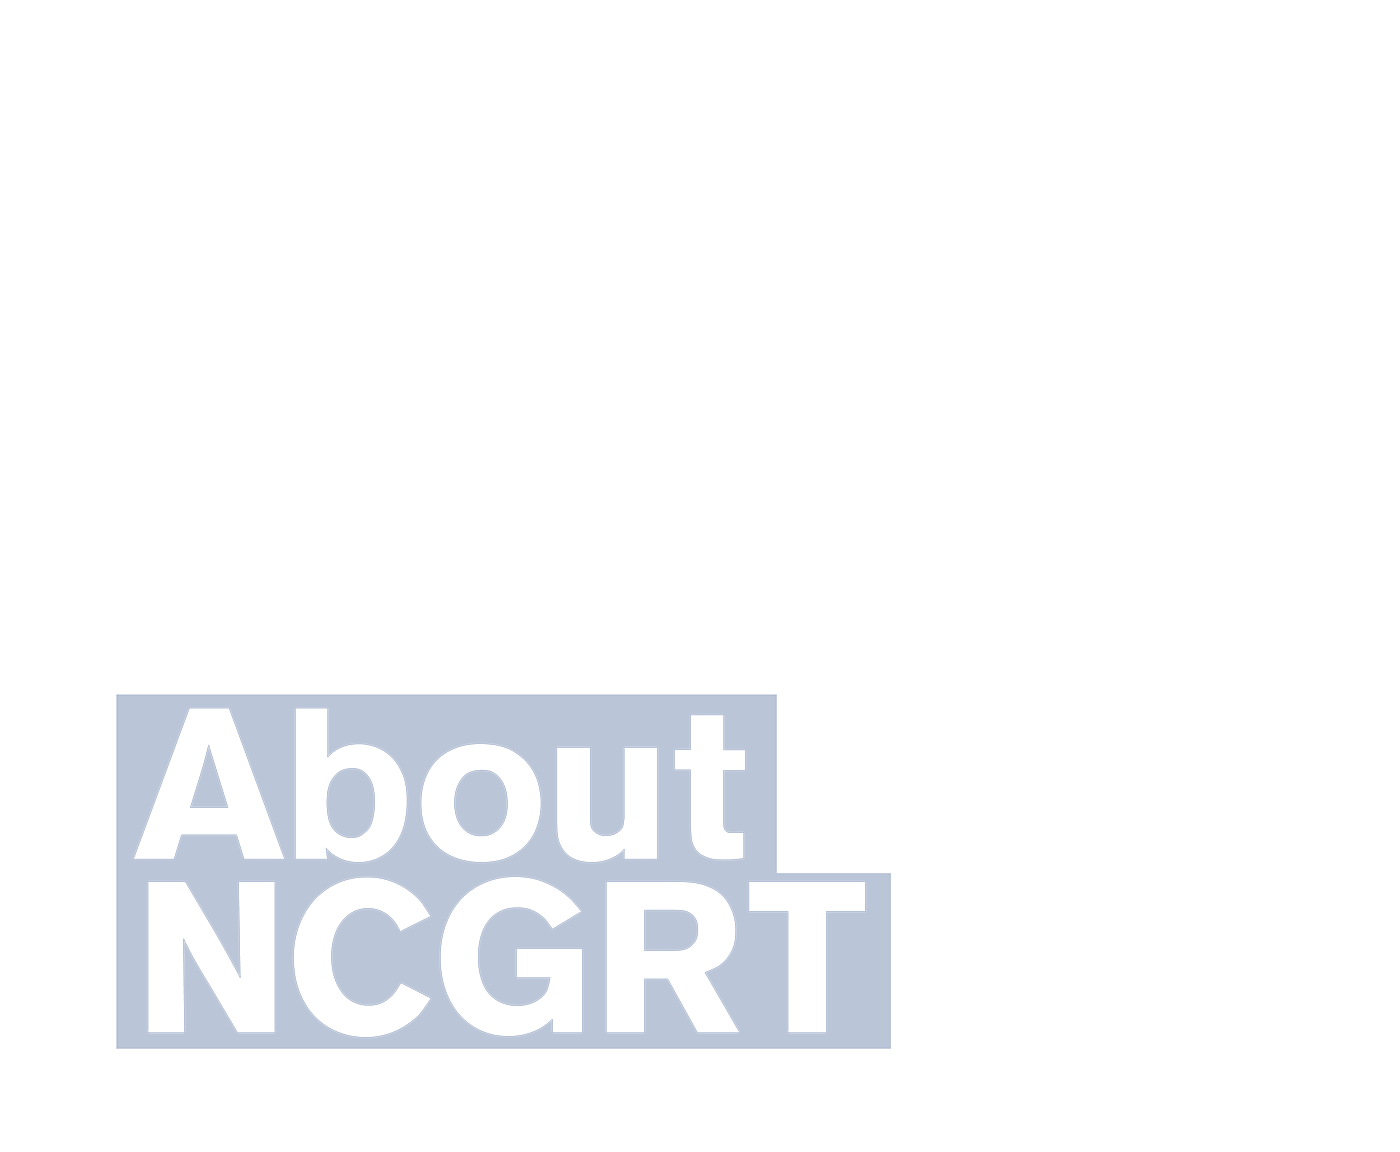 About NCGRT